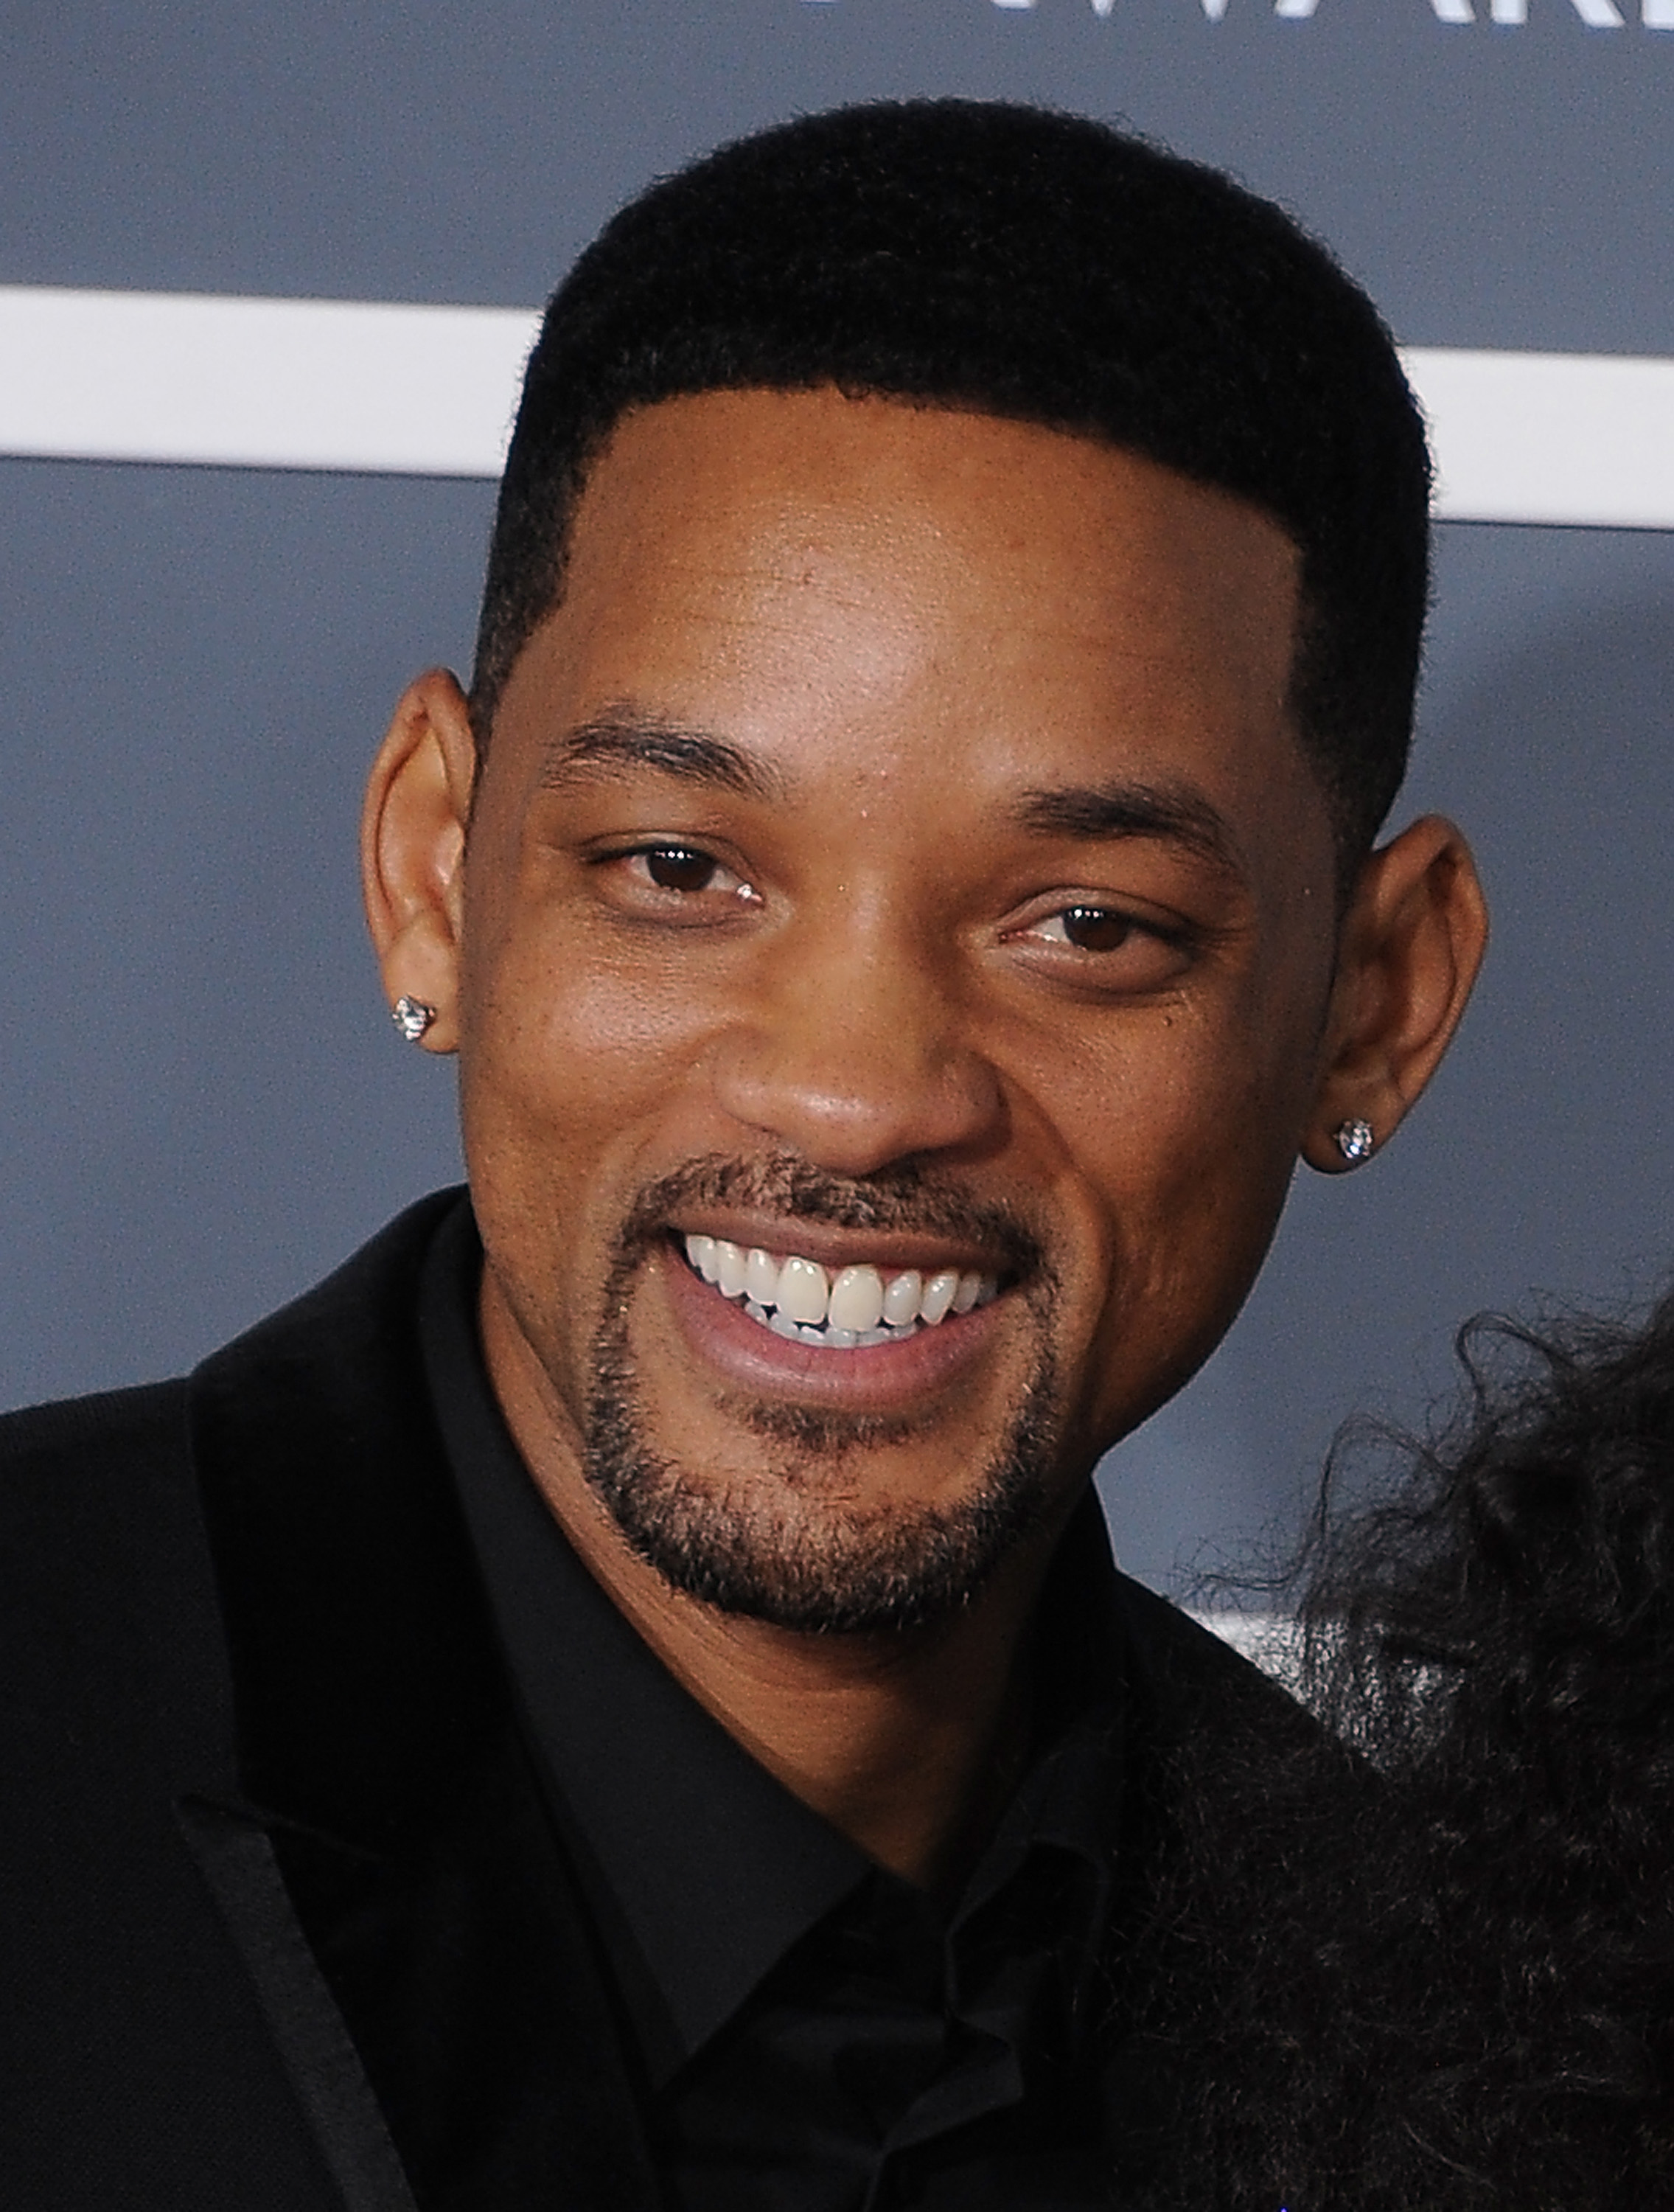 HQ Will Smith Wallpapers | File 1043.63Kb